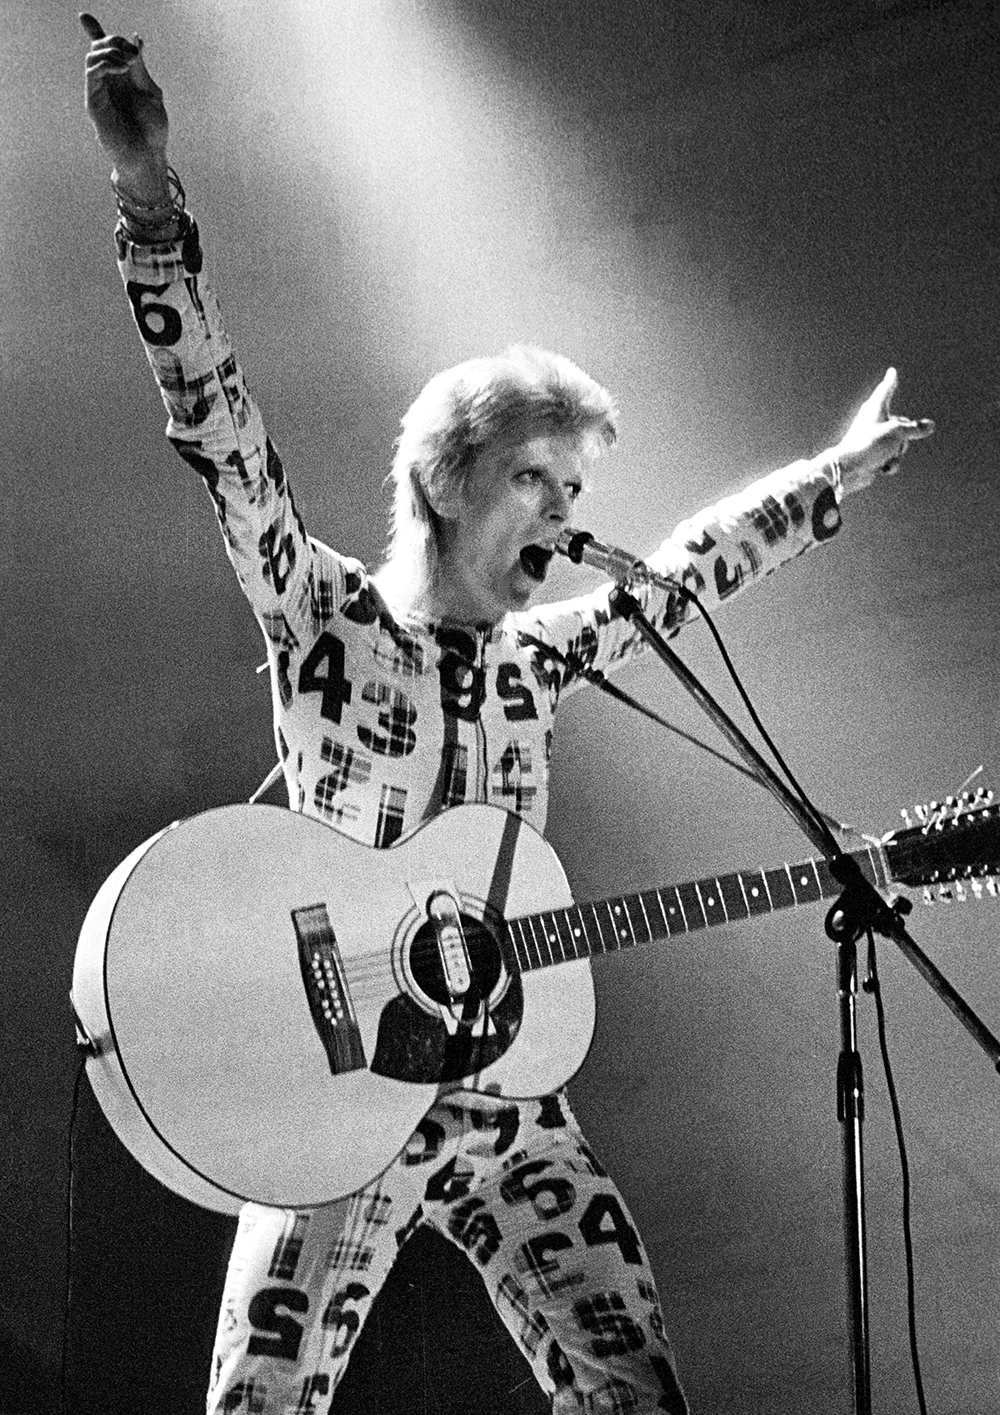 As Ziggy Stardust, this time at Newcastle City Hall in 1973.